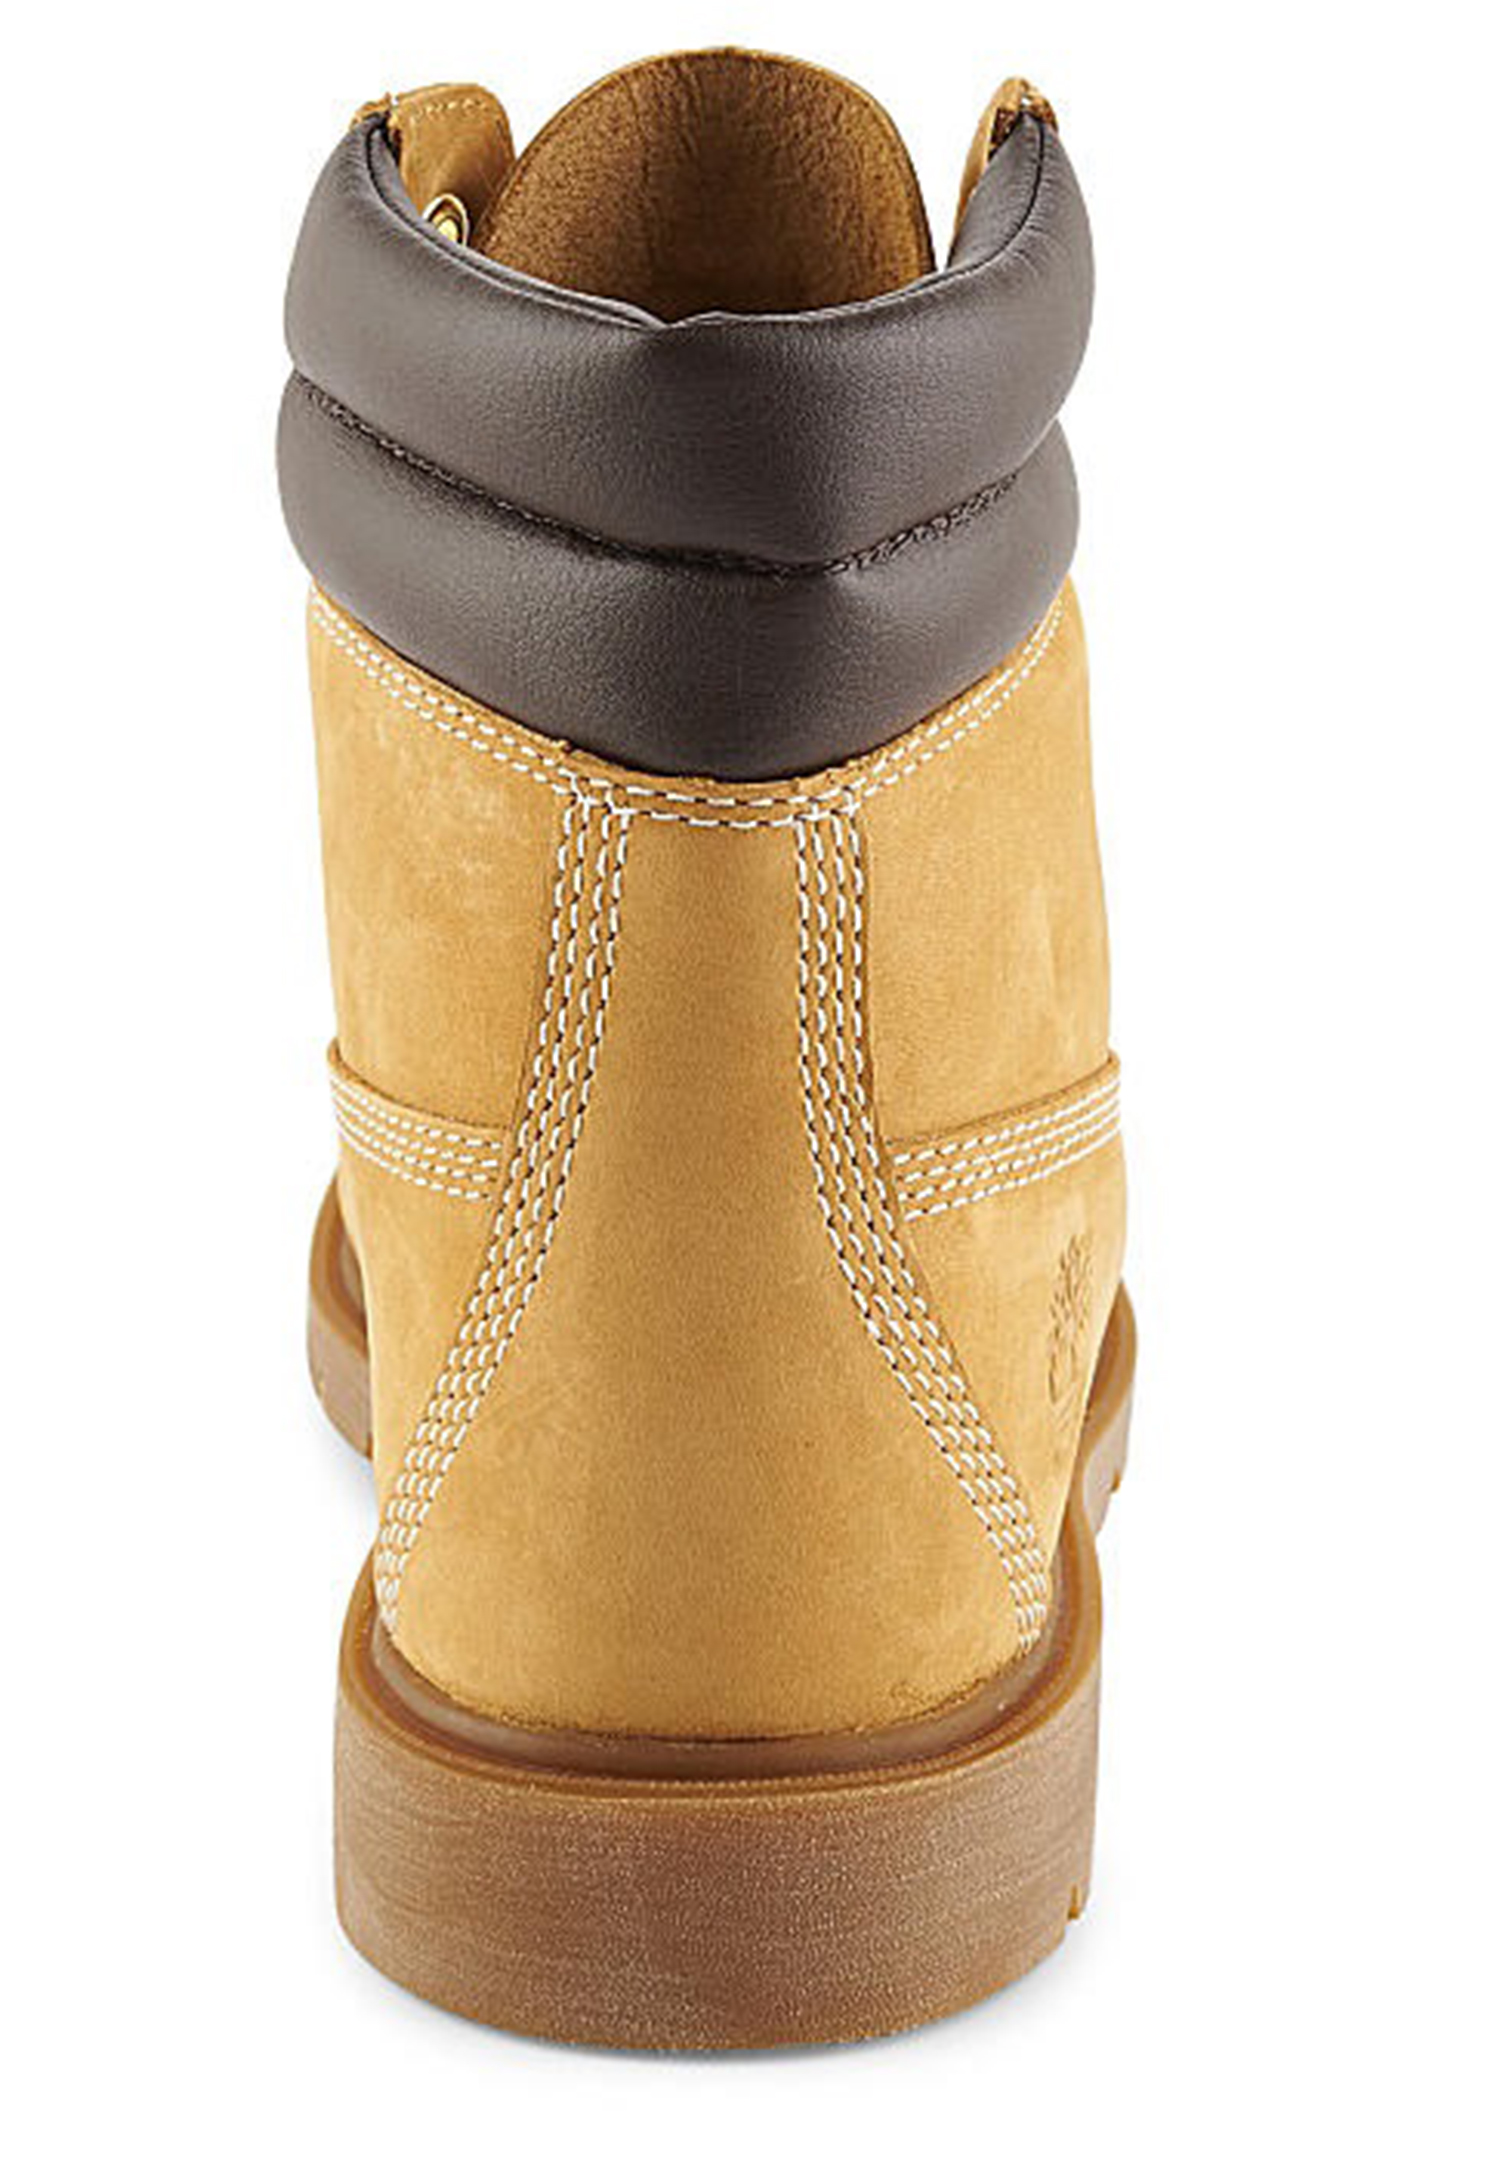 Timberland Linden Woods 6 in Boot Damen Stiefelette TB 0A2KXH Braun 